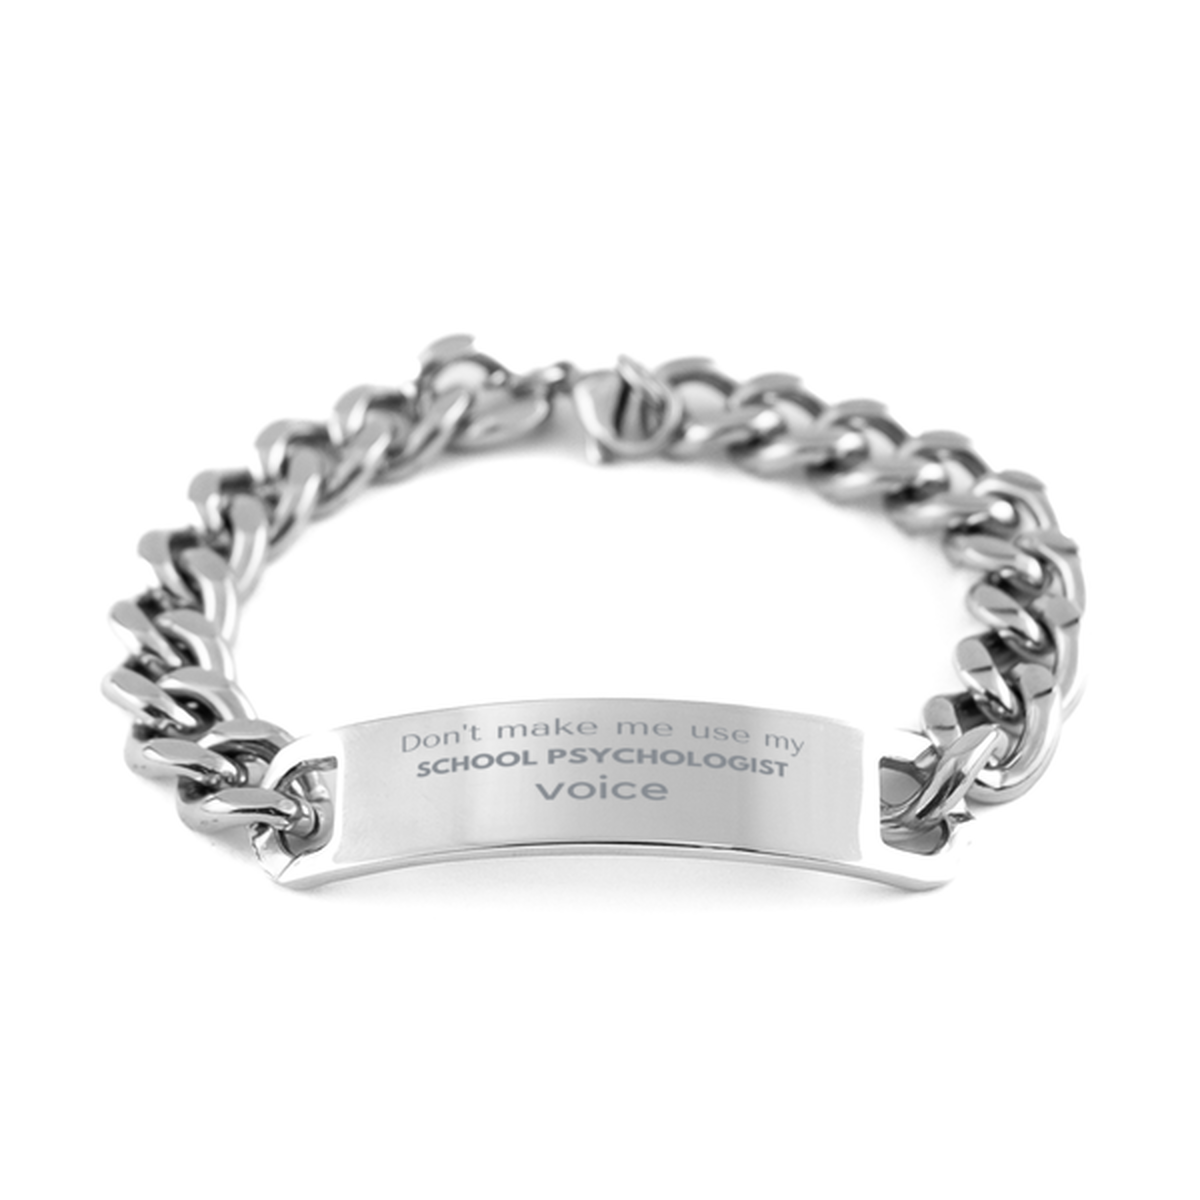 Don't make me use my School Psychologist voice, Sarcasm School Psychologist Gifts, Christmas School Psychologist Cuban Chain Stainless Steel Bracelet Birthday Unique Gifts For School Psychologist Coworkers, Men, Women, Colleague, Friends